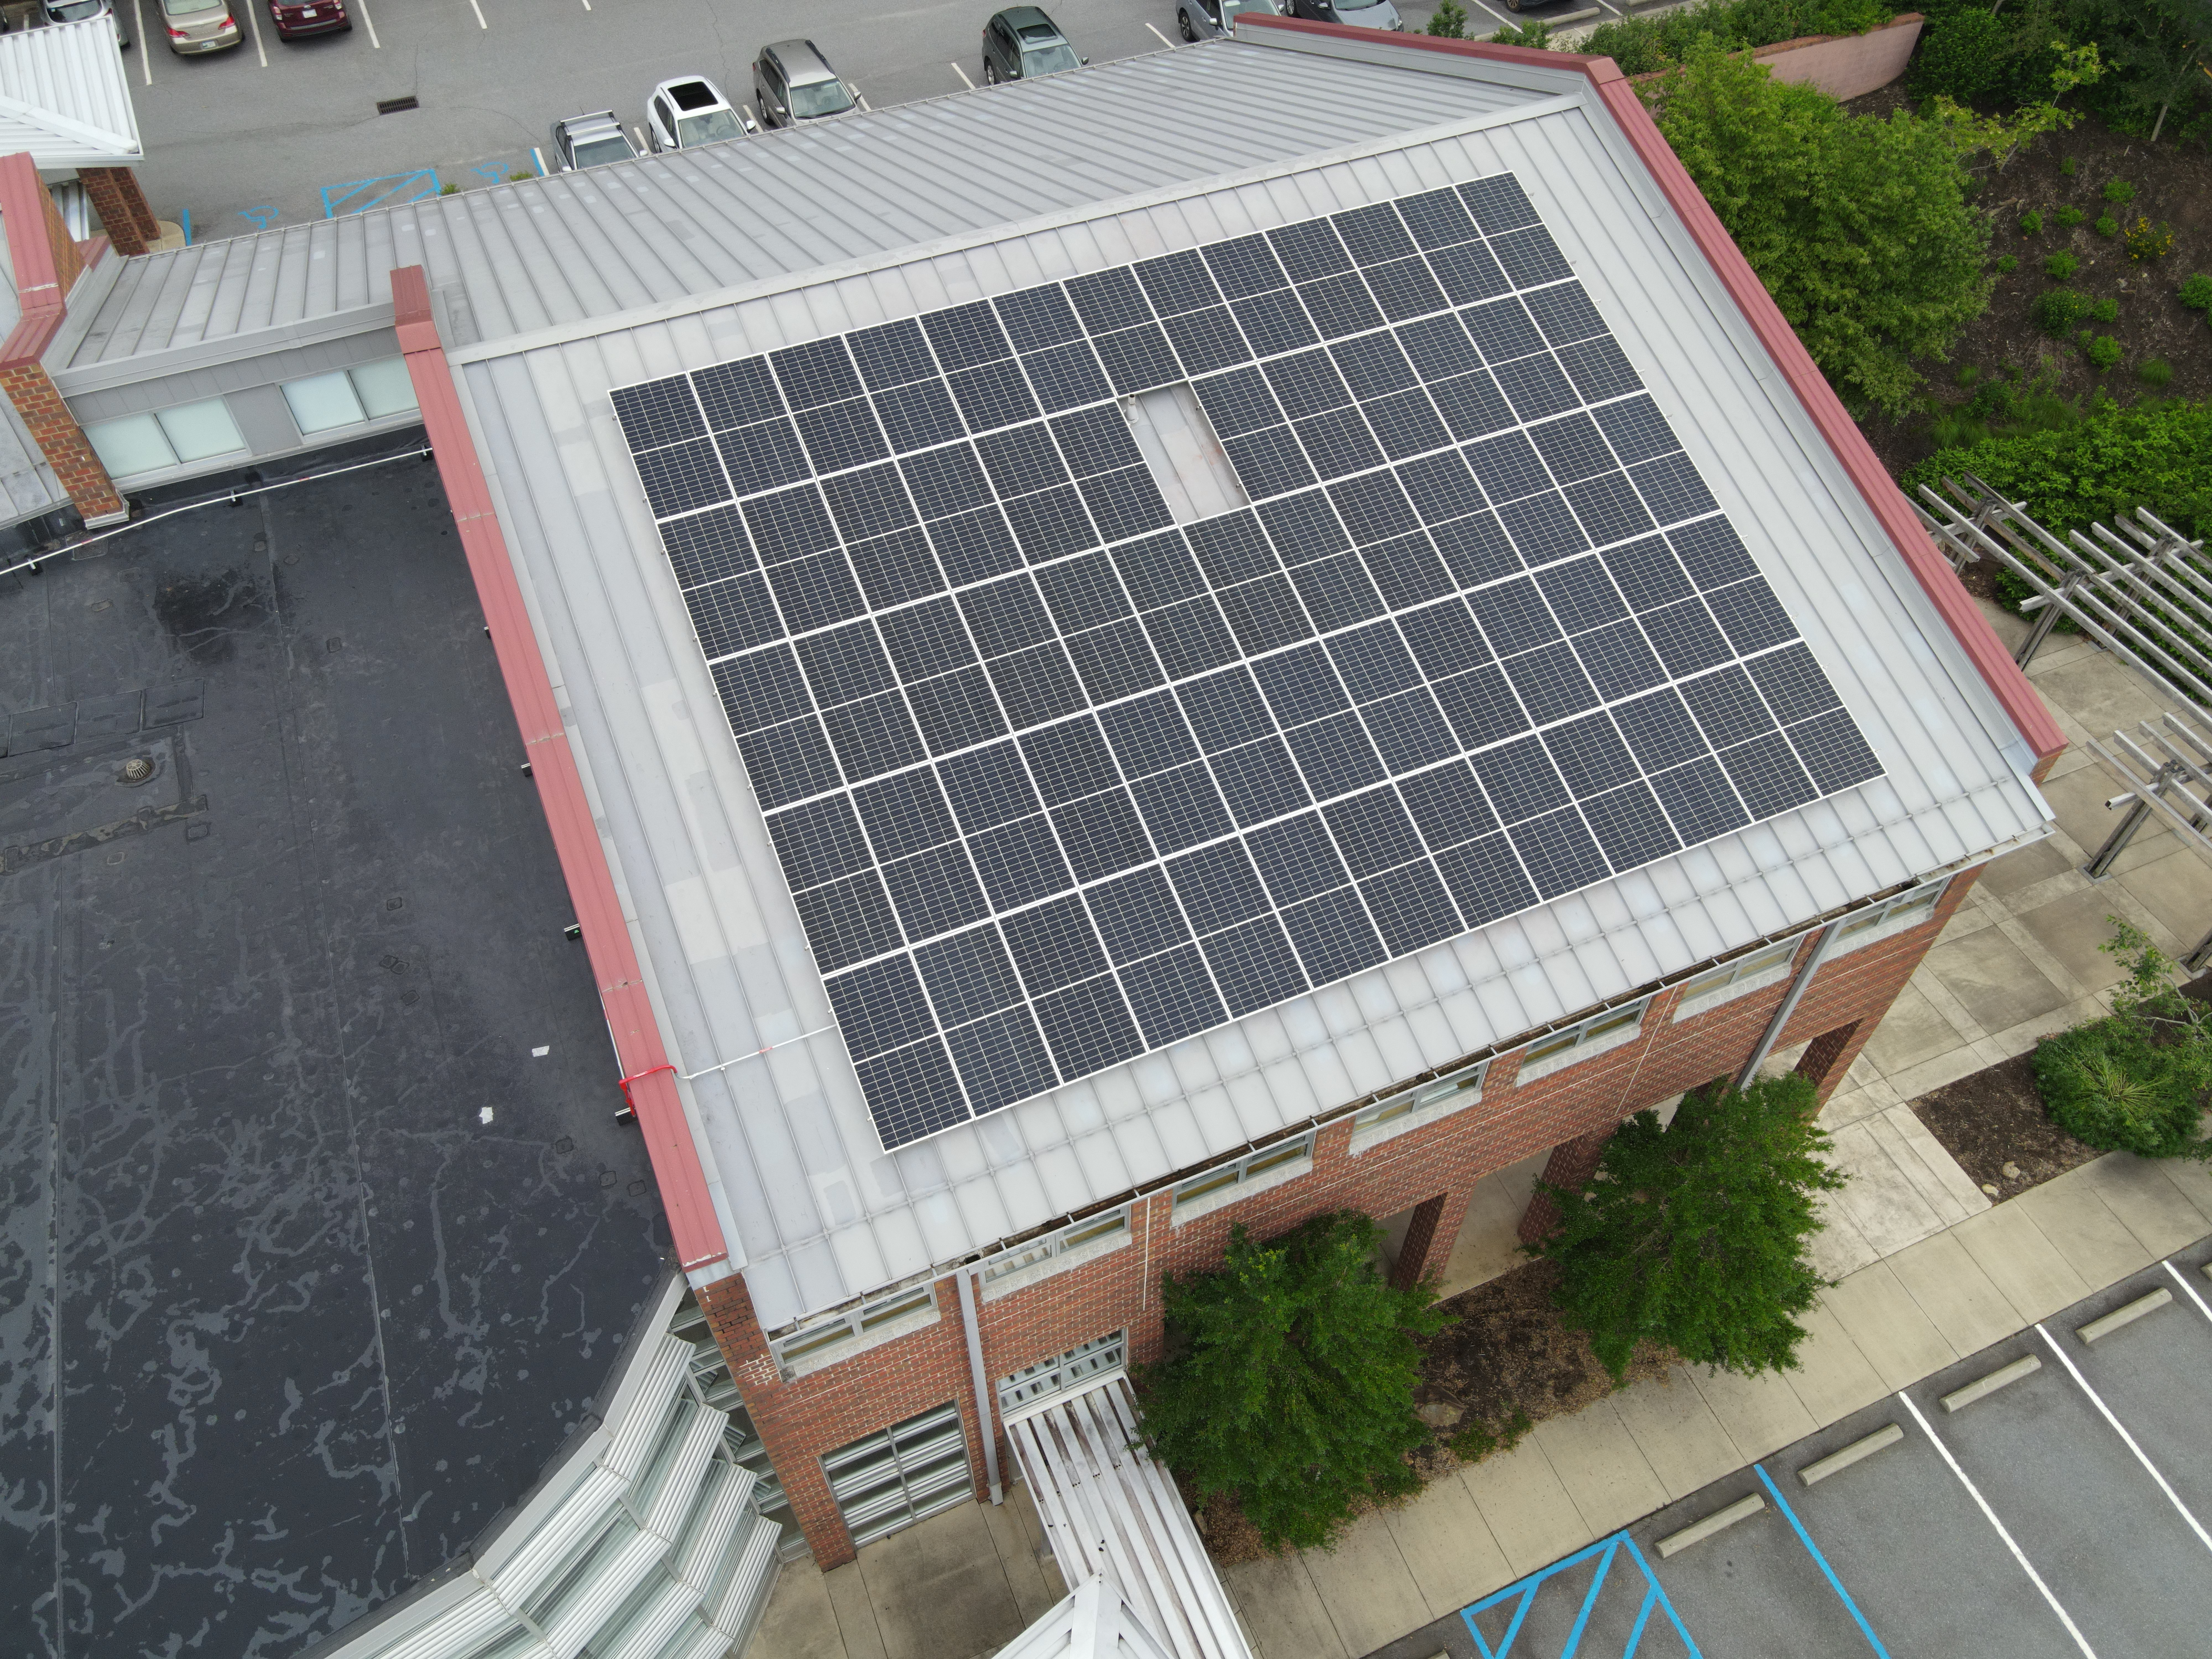 The 64-panel solar array will provide 37,000 kWh annually for UNC Asheville Reuter Center